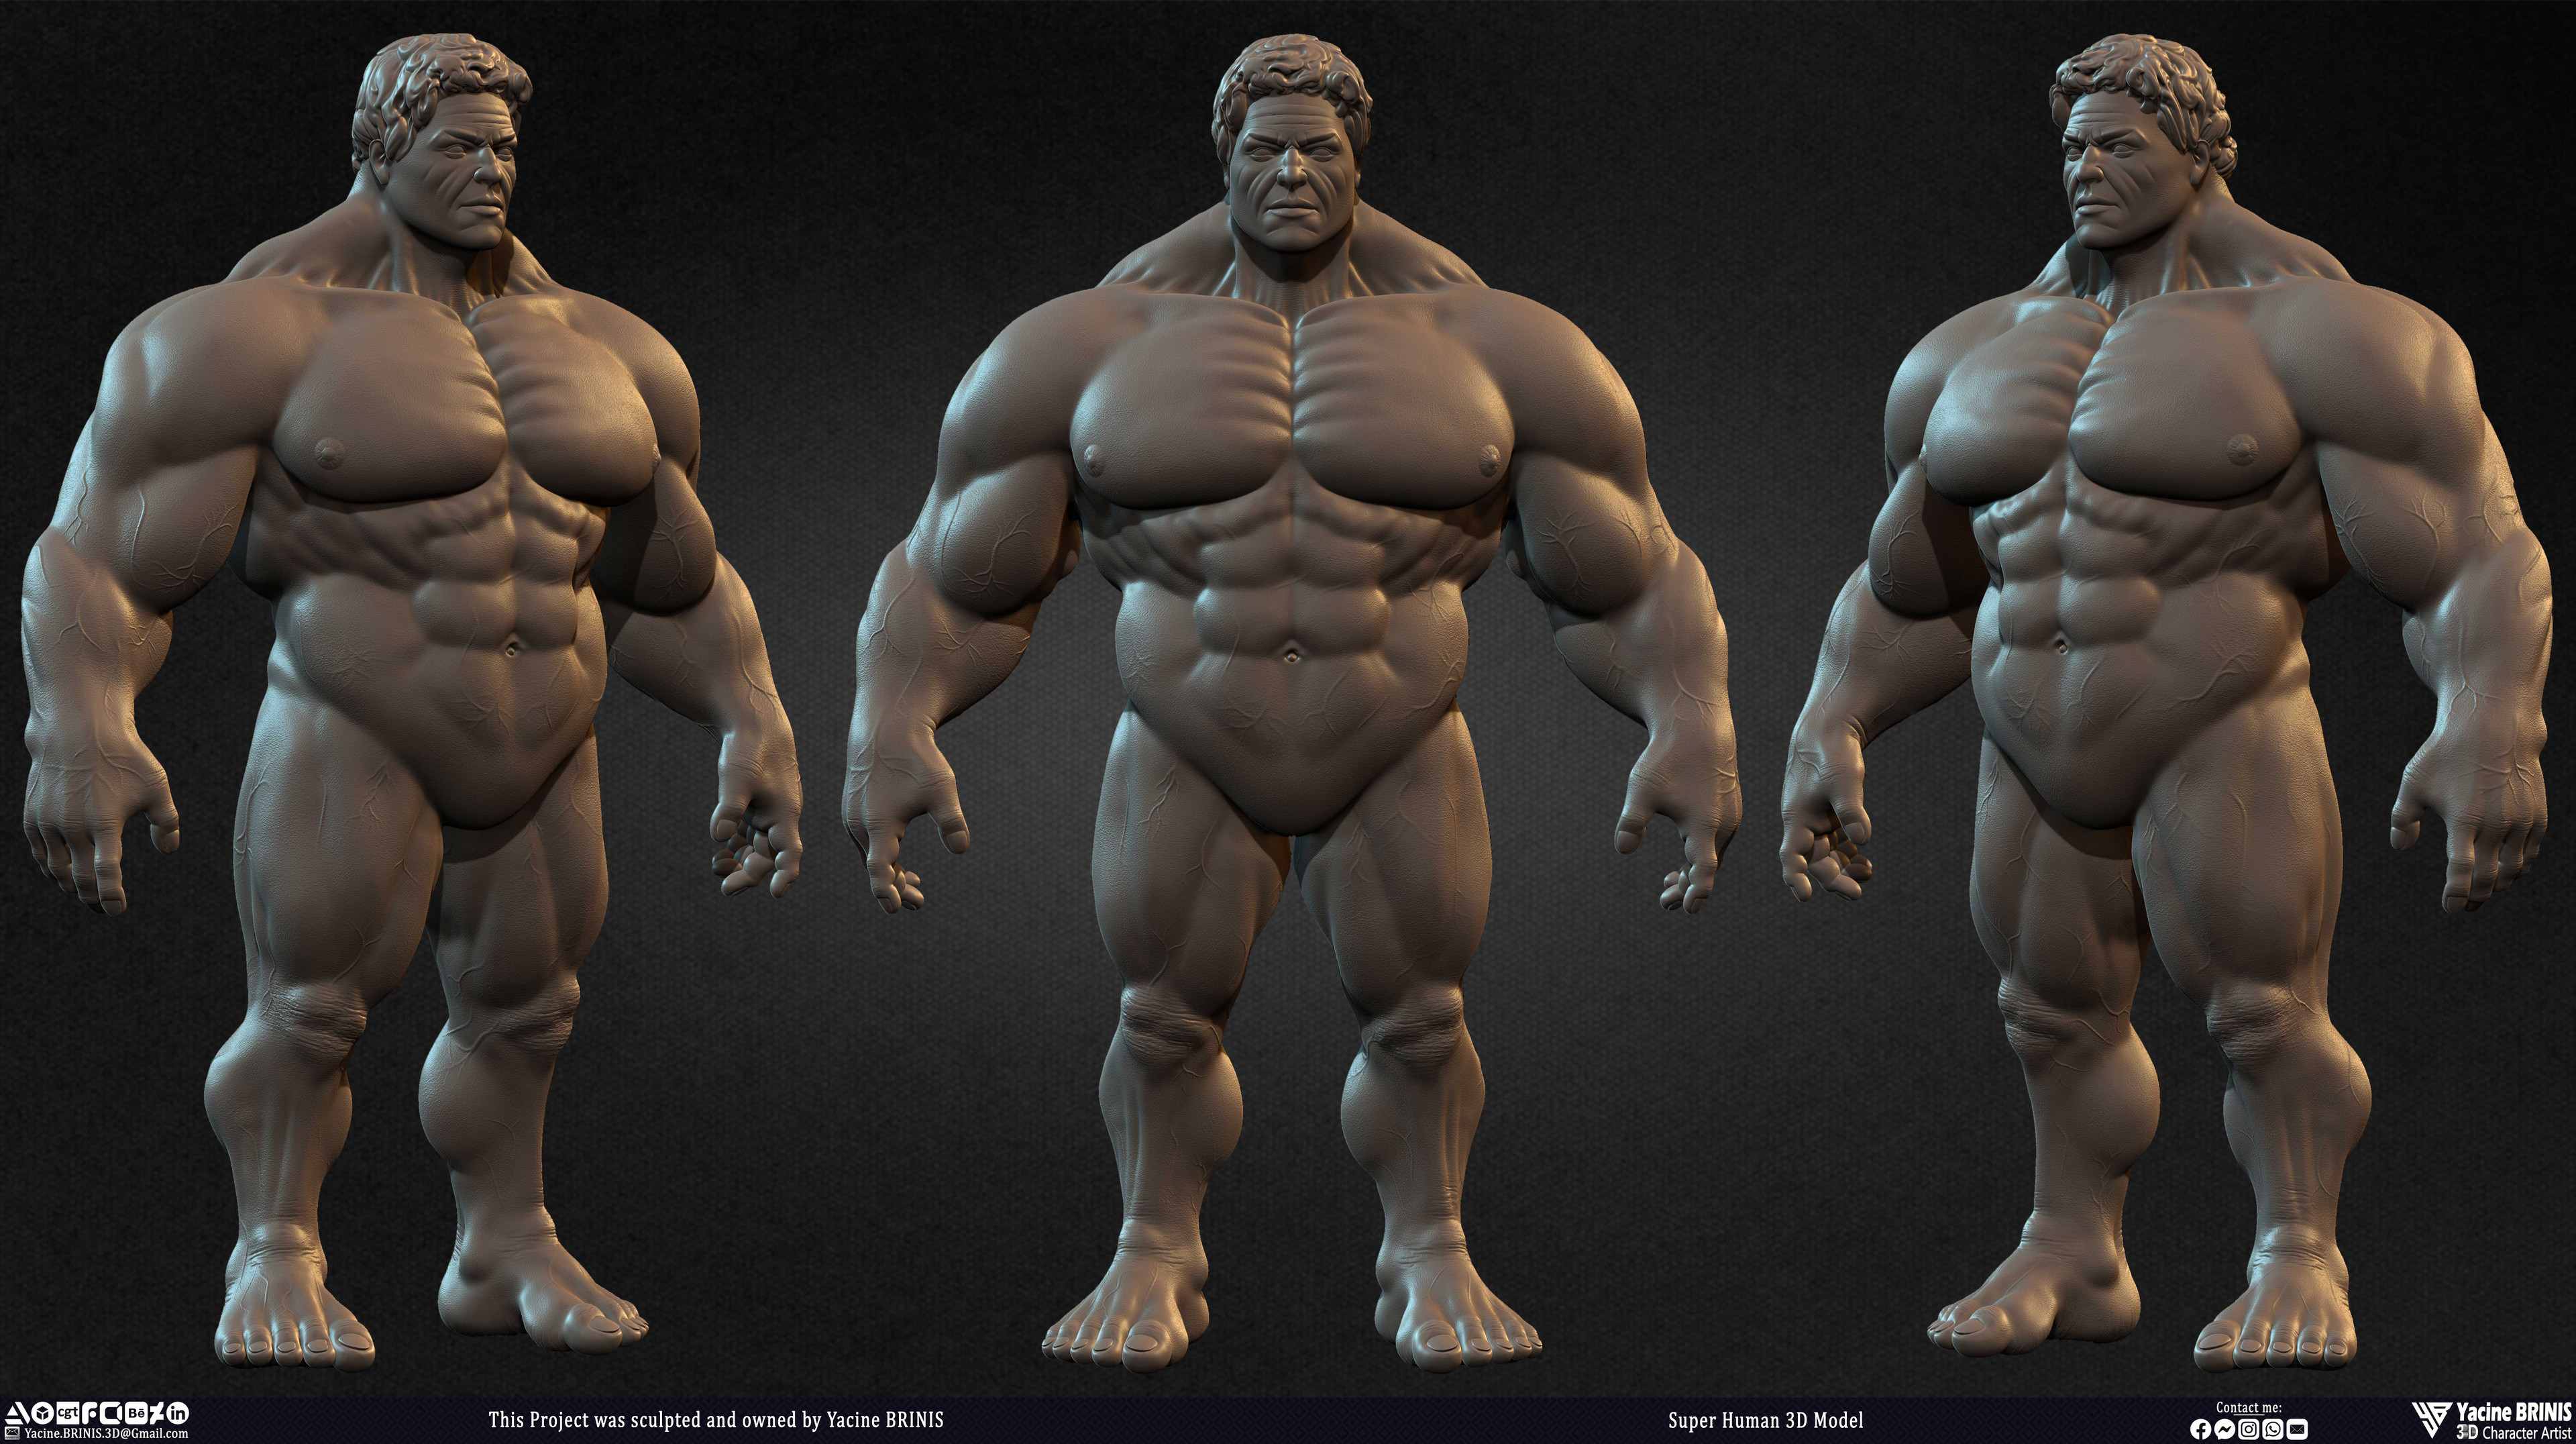 Super Human 3D Model sculpted by Yacine BRINIS 007